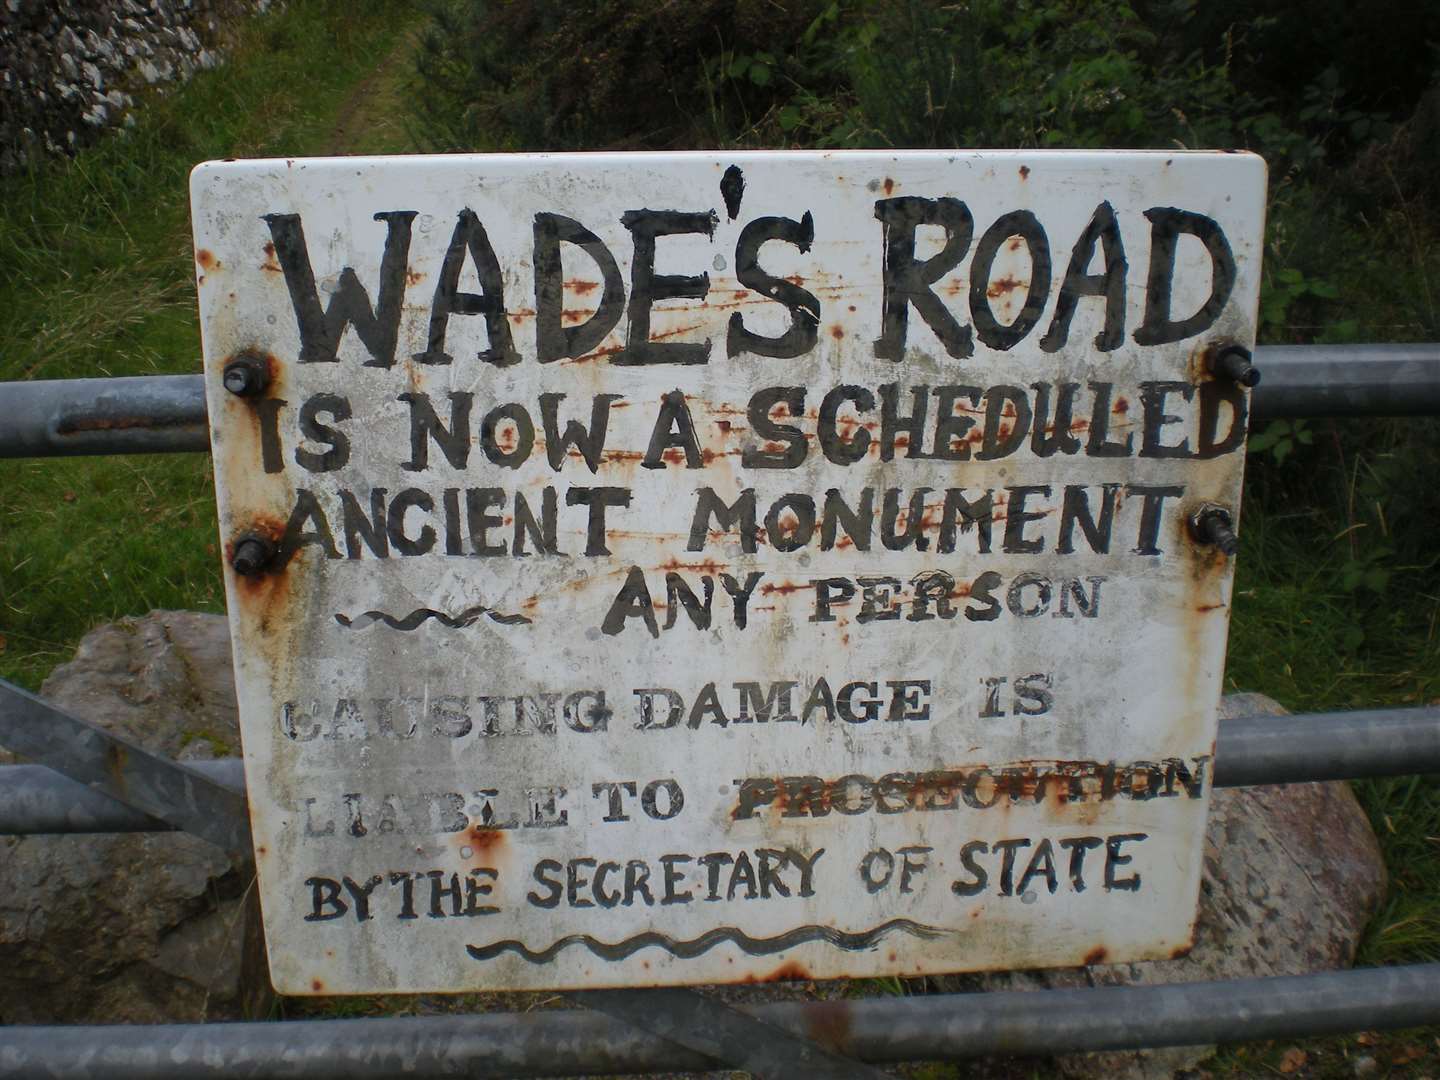 Scheduled monument sign at the FOrt Augustus end of the route.